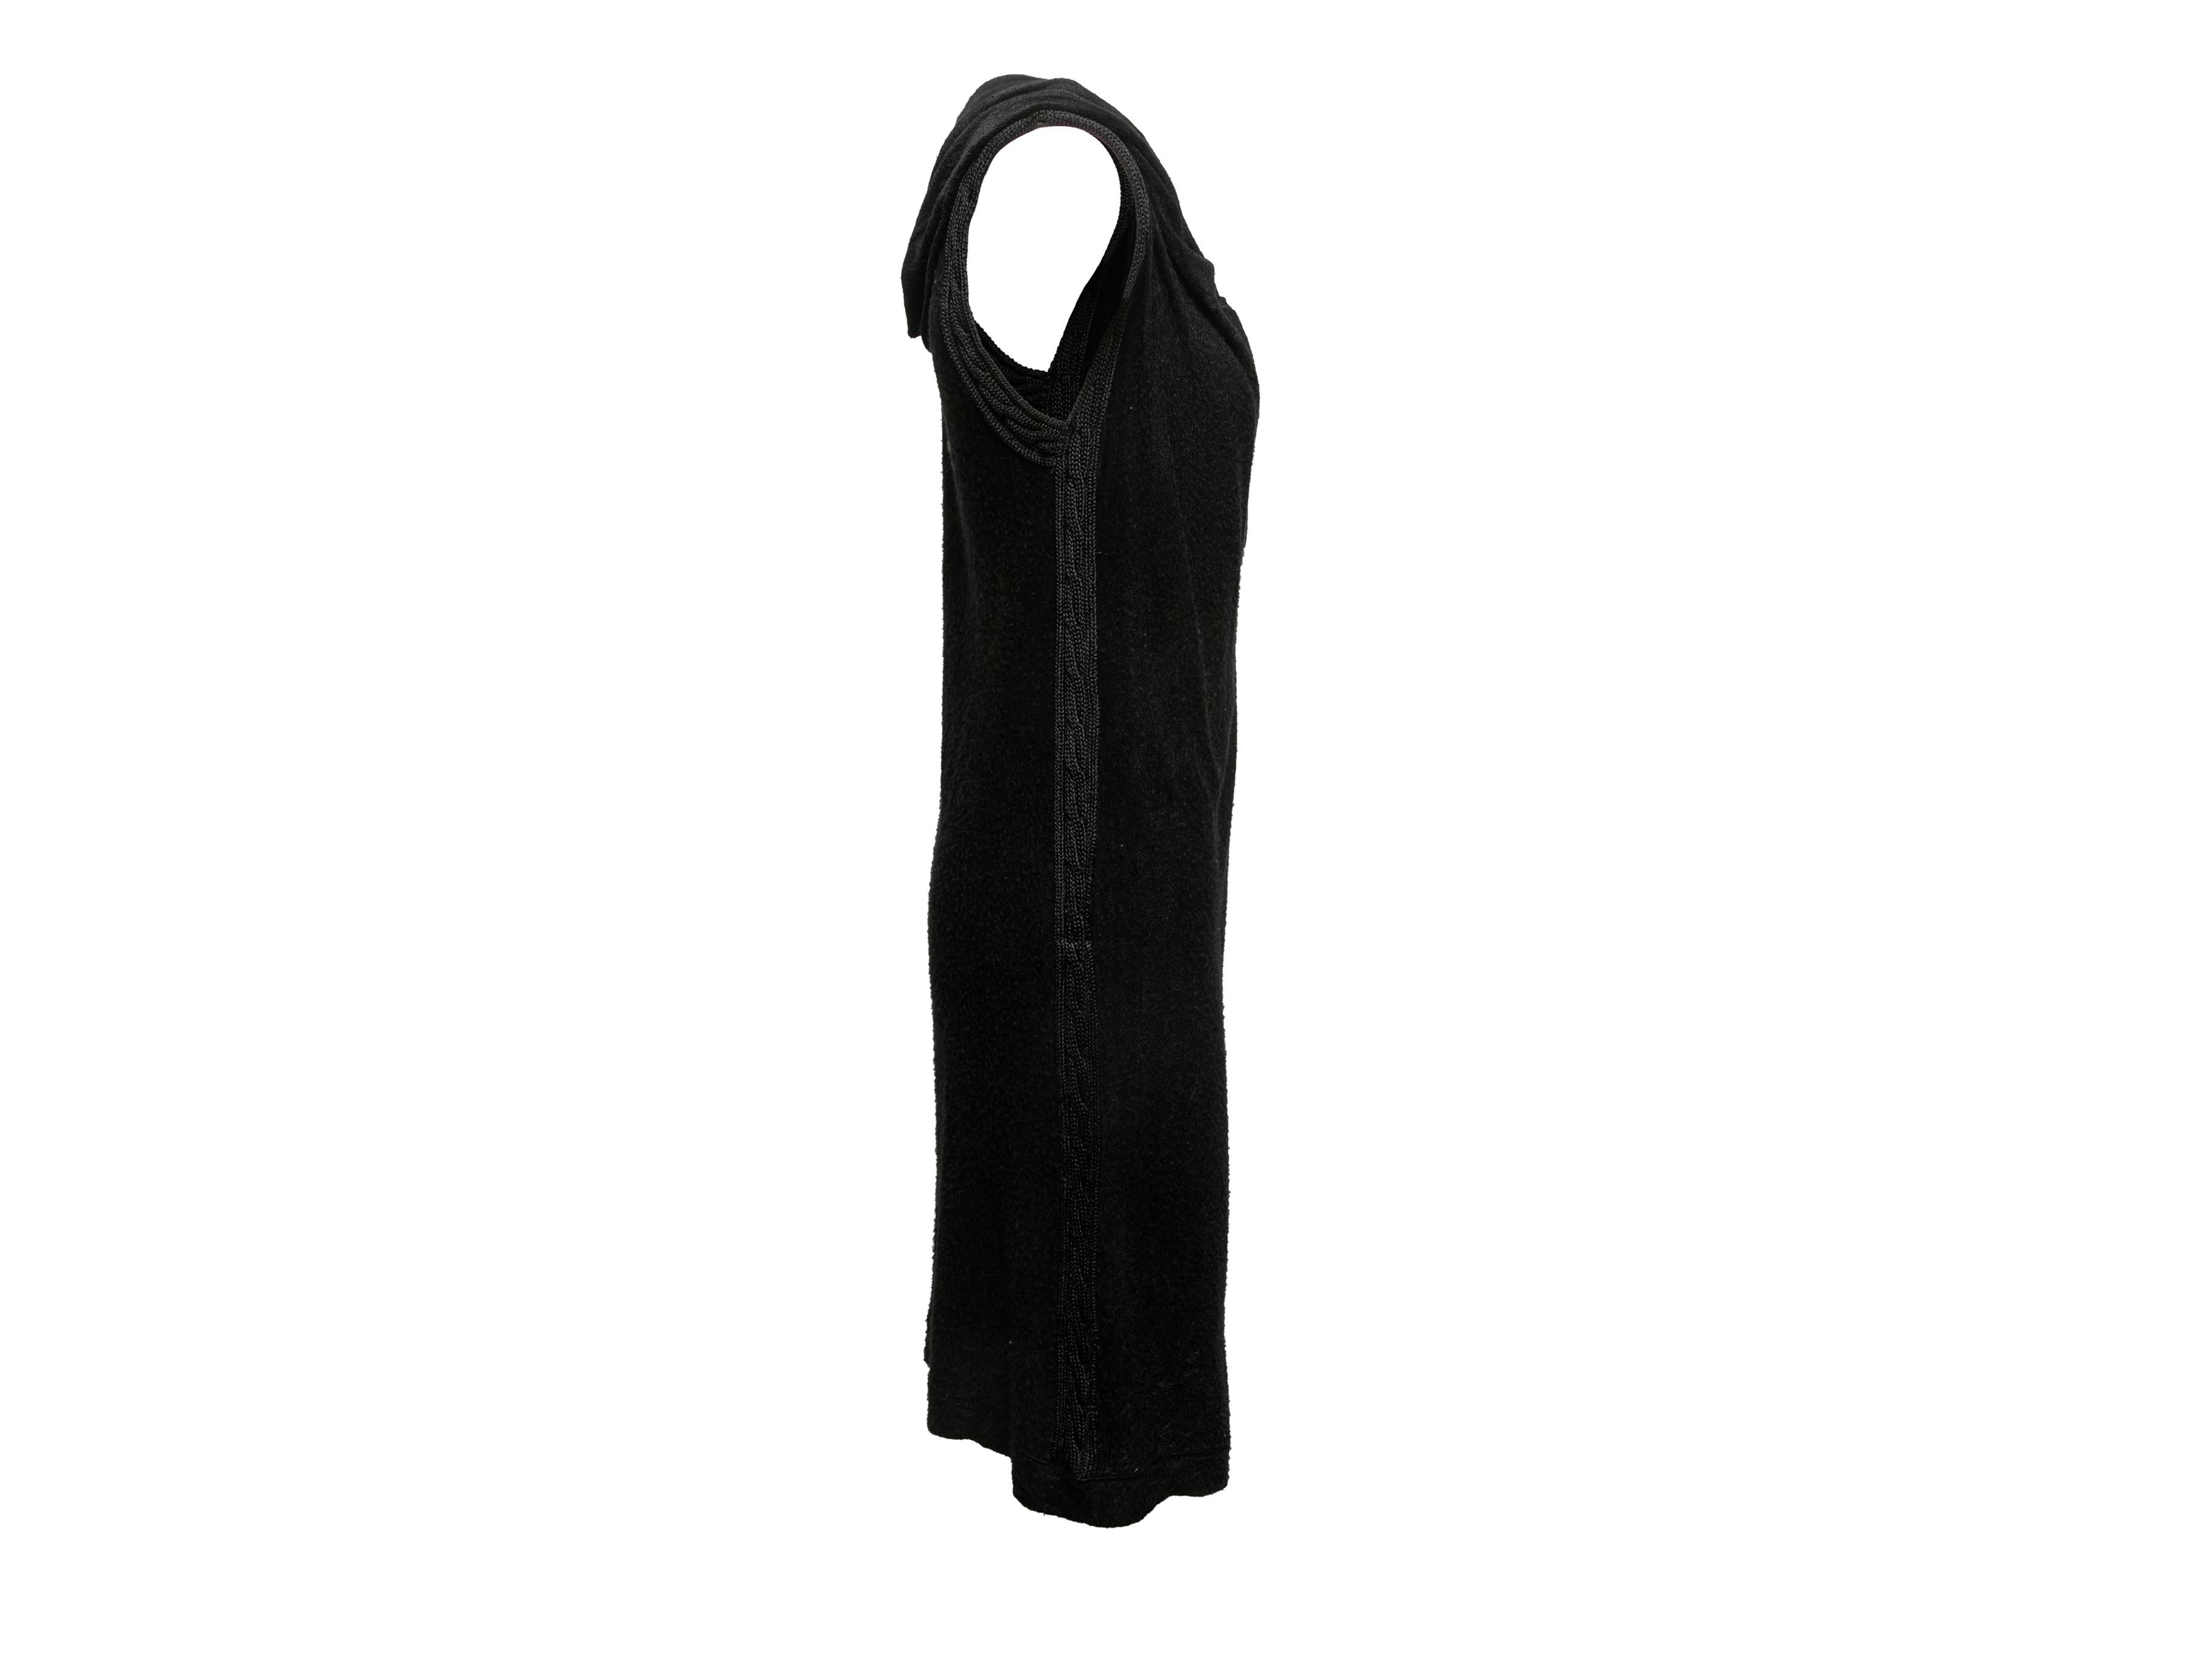 Black hooded sleeveless dress by Gaultier². Drawstring tie at front neckline. 28